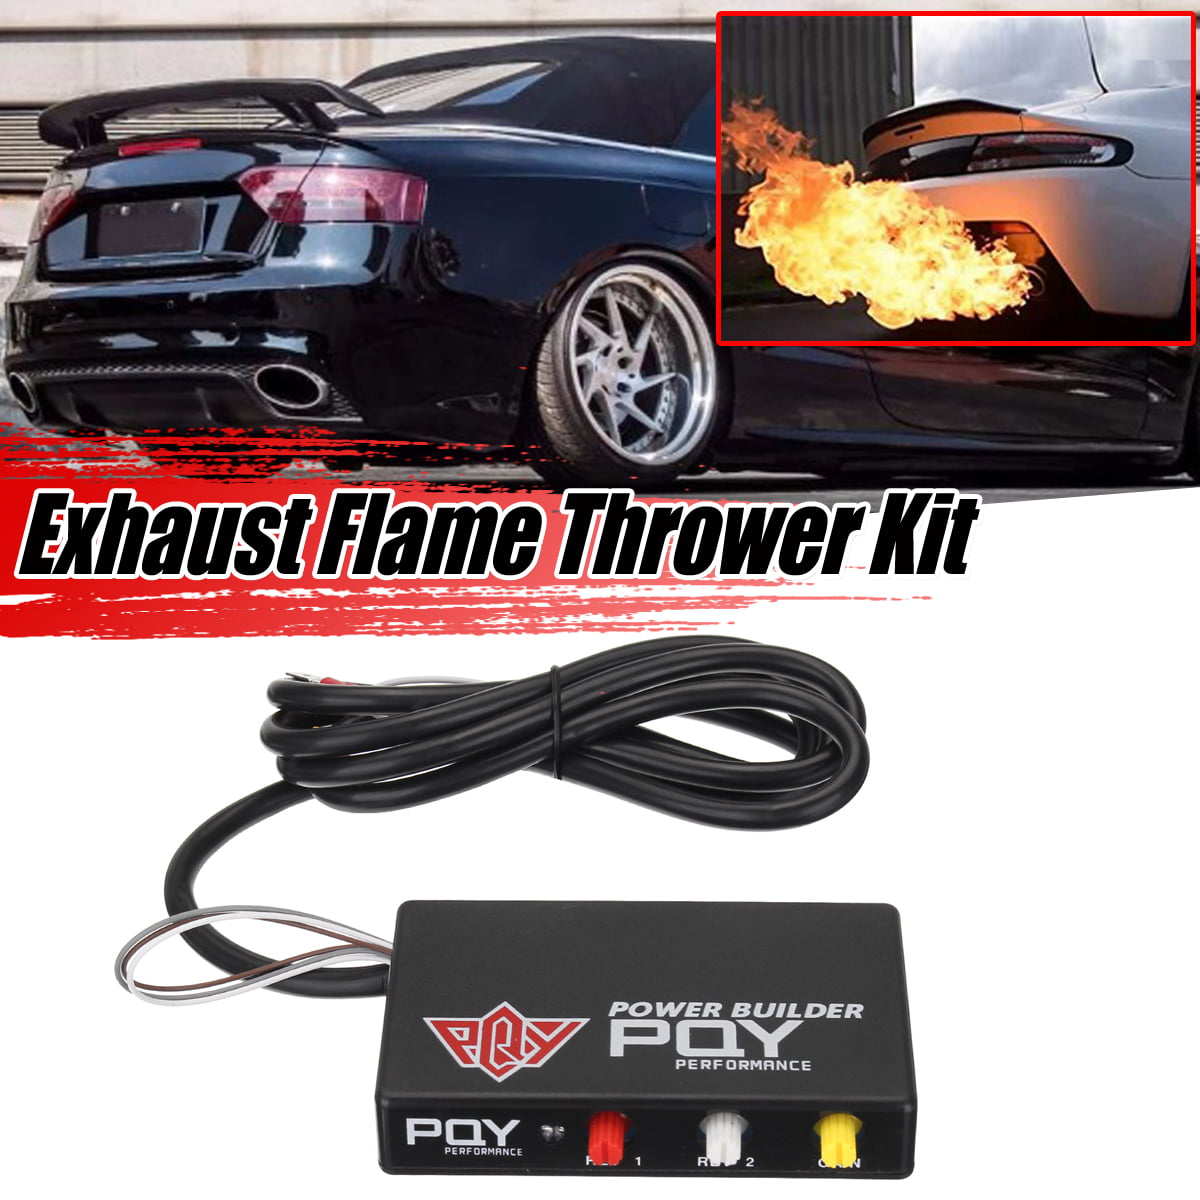 Engines Performance Rev Limiter Power Builder Exhaust Flame Fire Thrower Kit Car